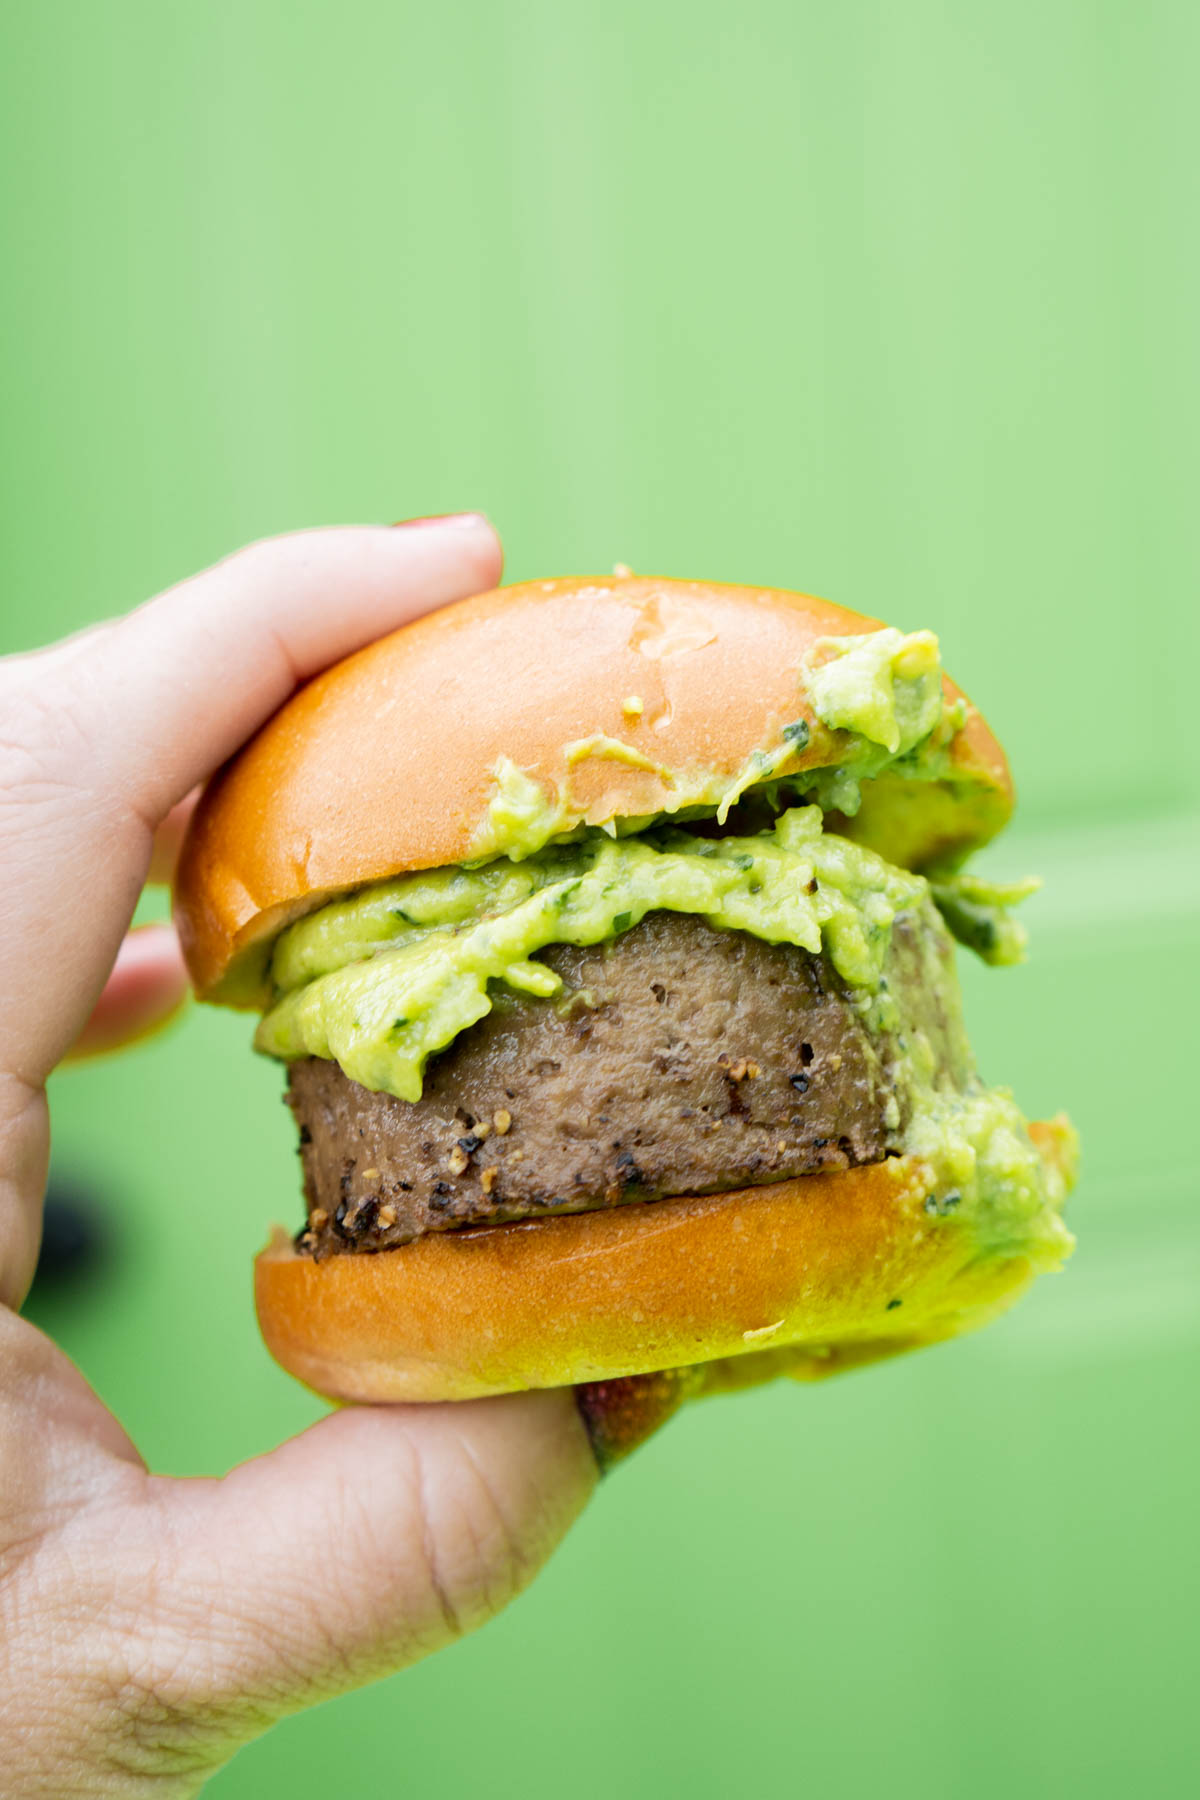 impossible avocado burger at Disneyland food and wine festival